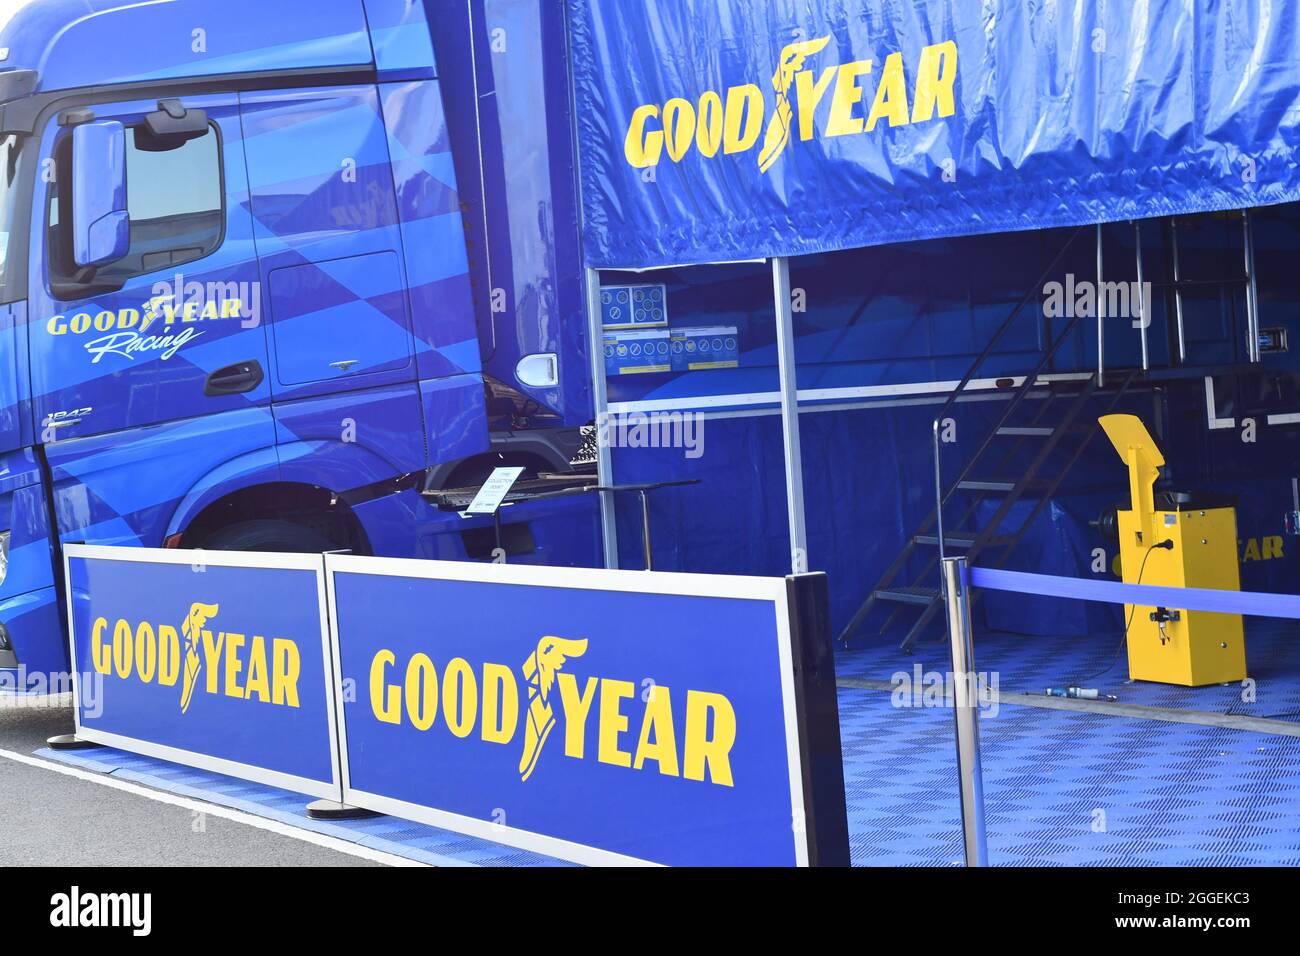 A Good Year awning, lorry and barriers at an event in the UK, publicizing their brand showing their trademarked winged foot of Mercury. Stock Photo